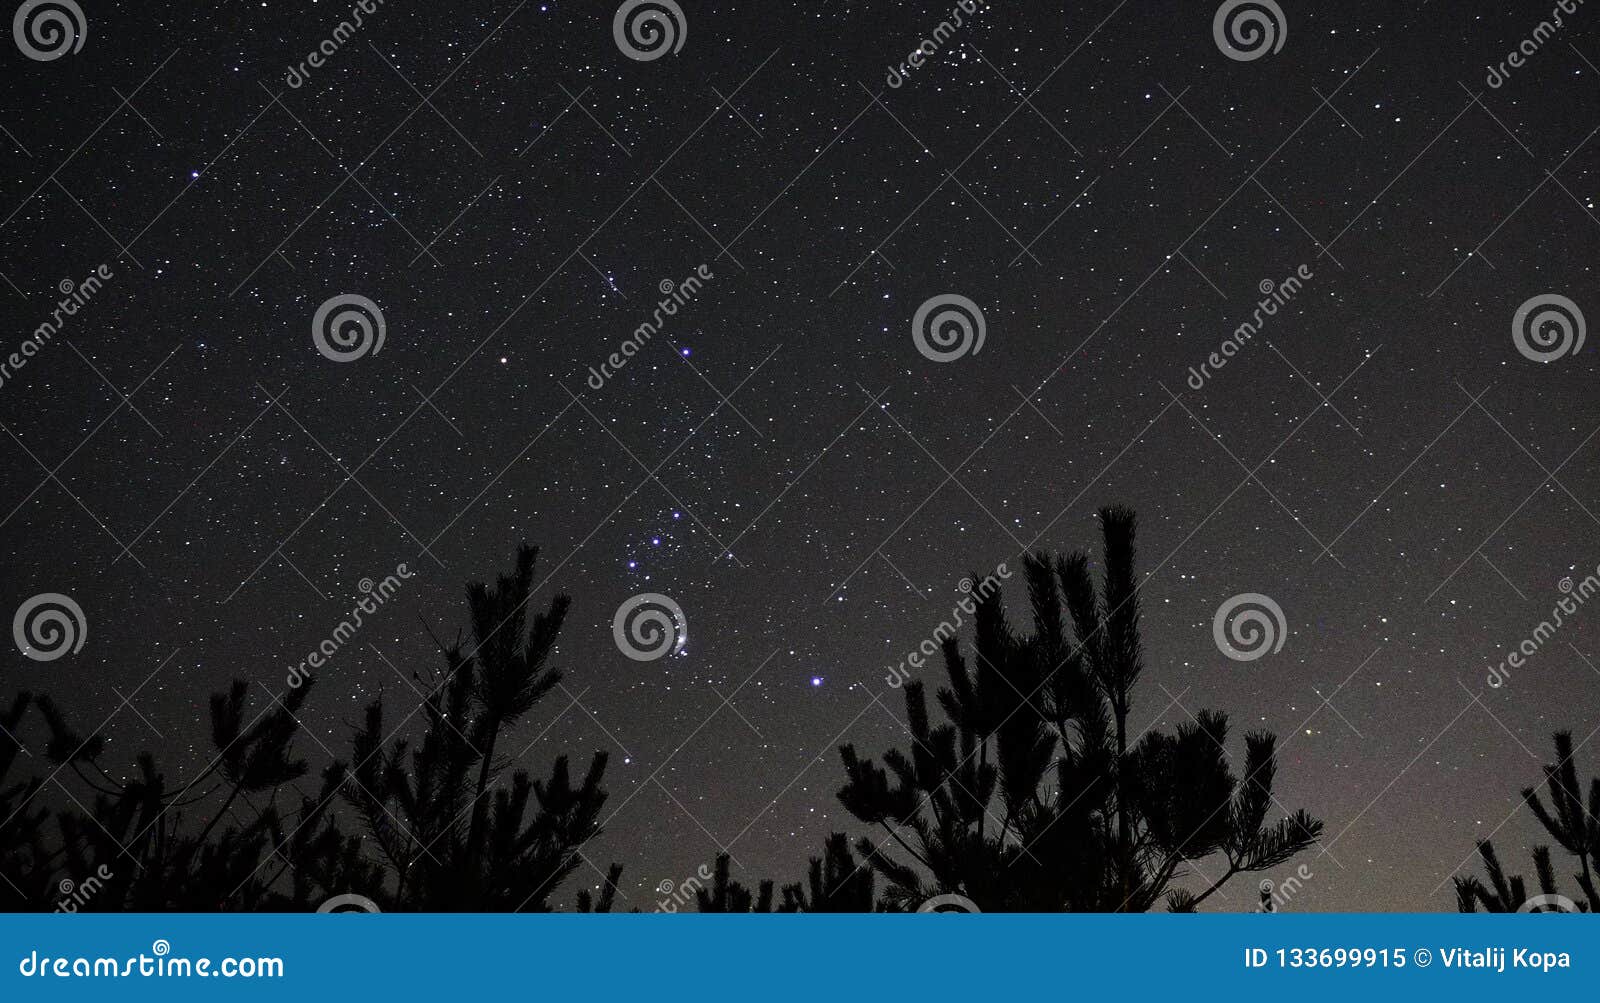 night sky stars orion constellation observing